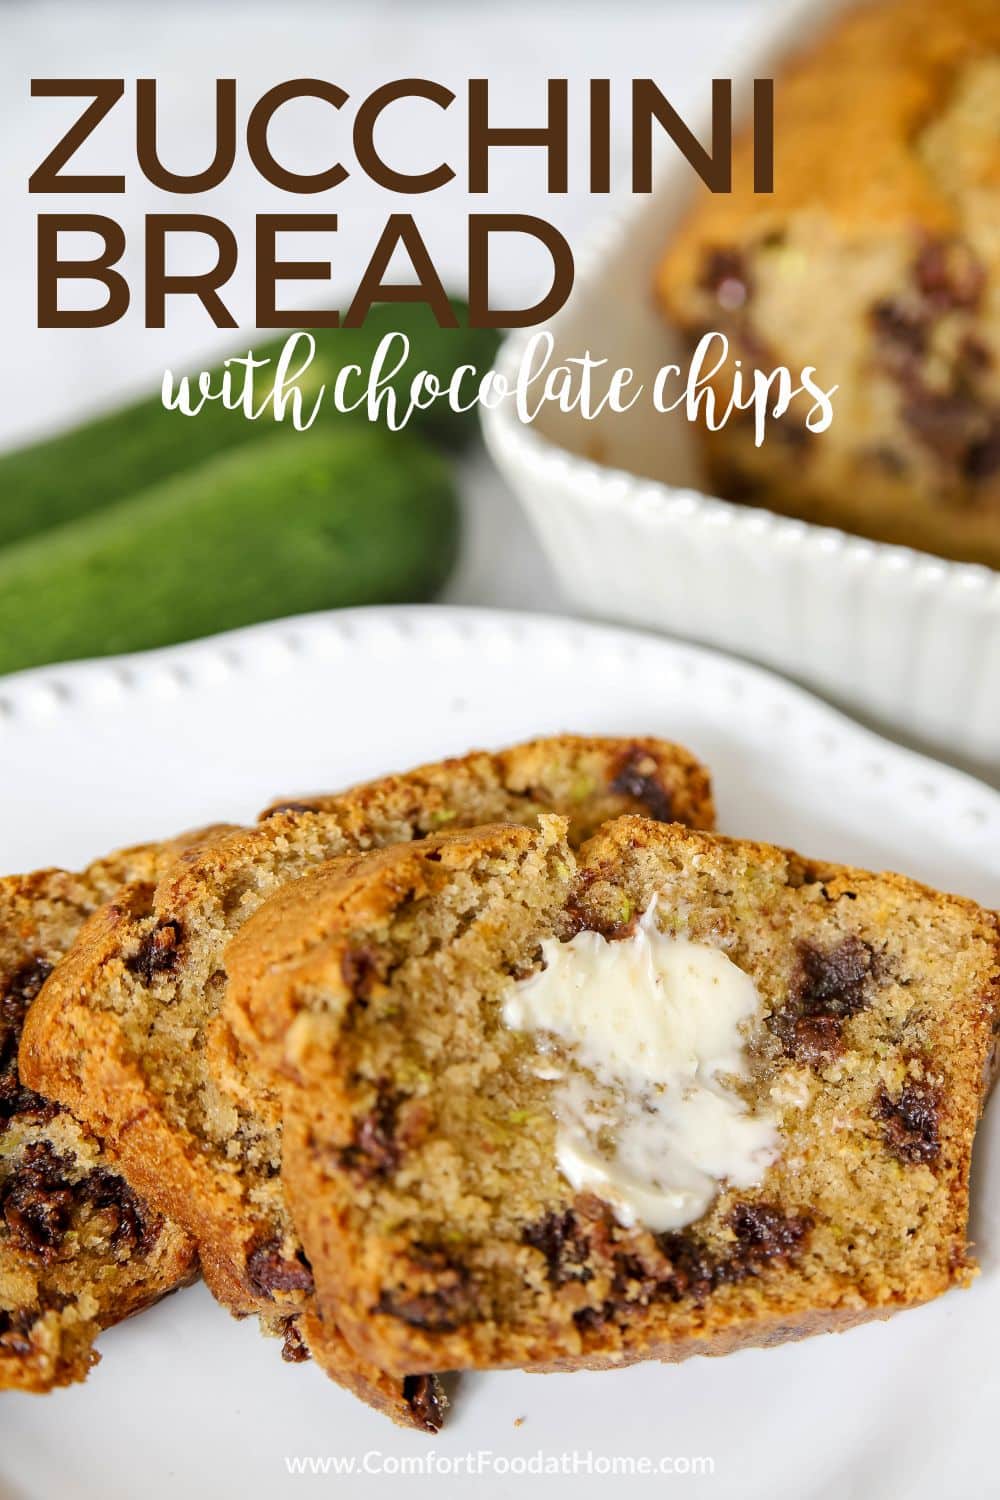 Zucchini Bread with chocolate chips